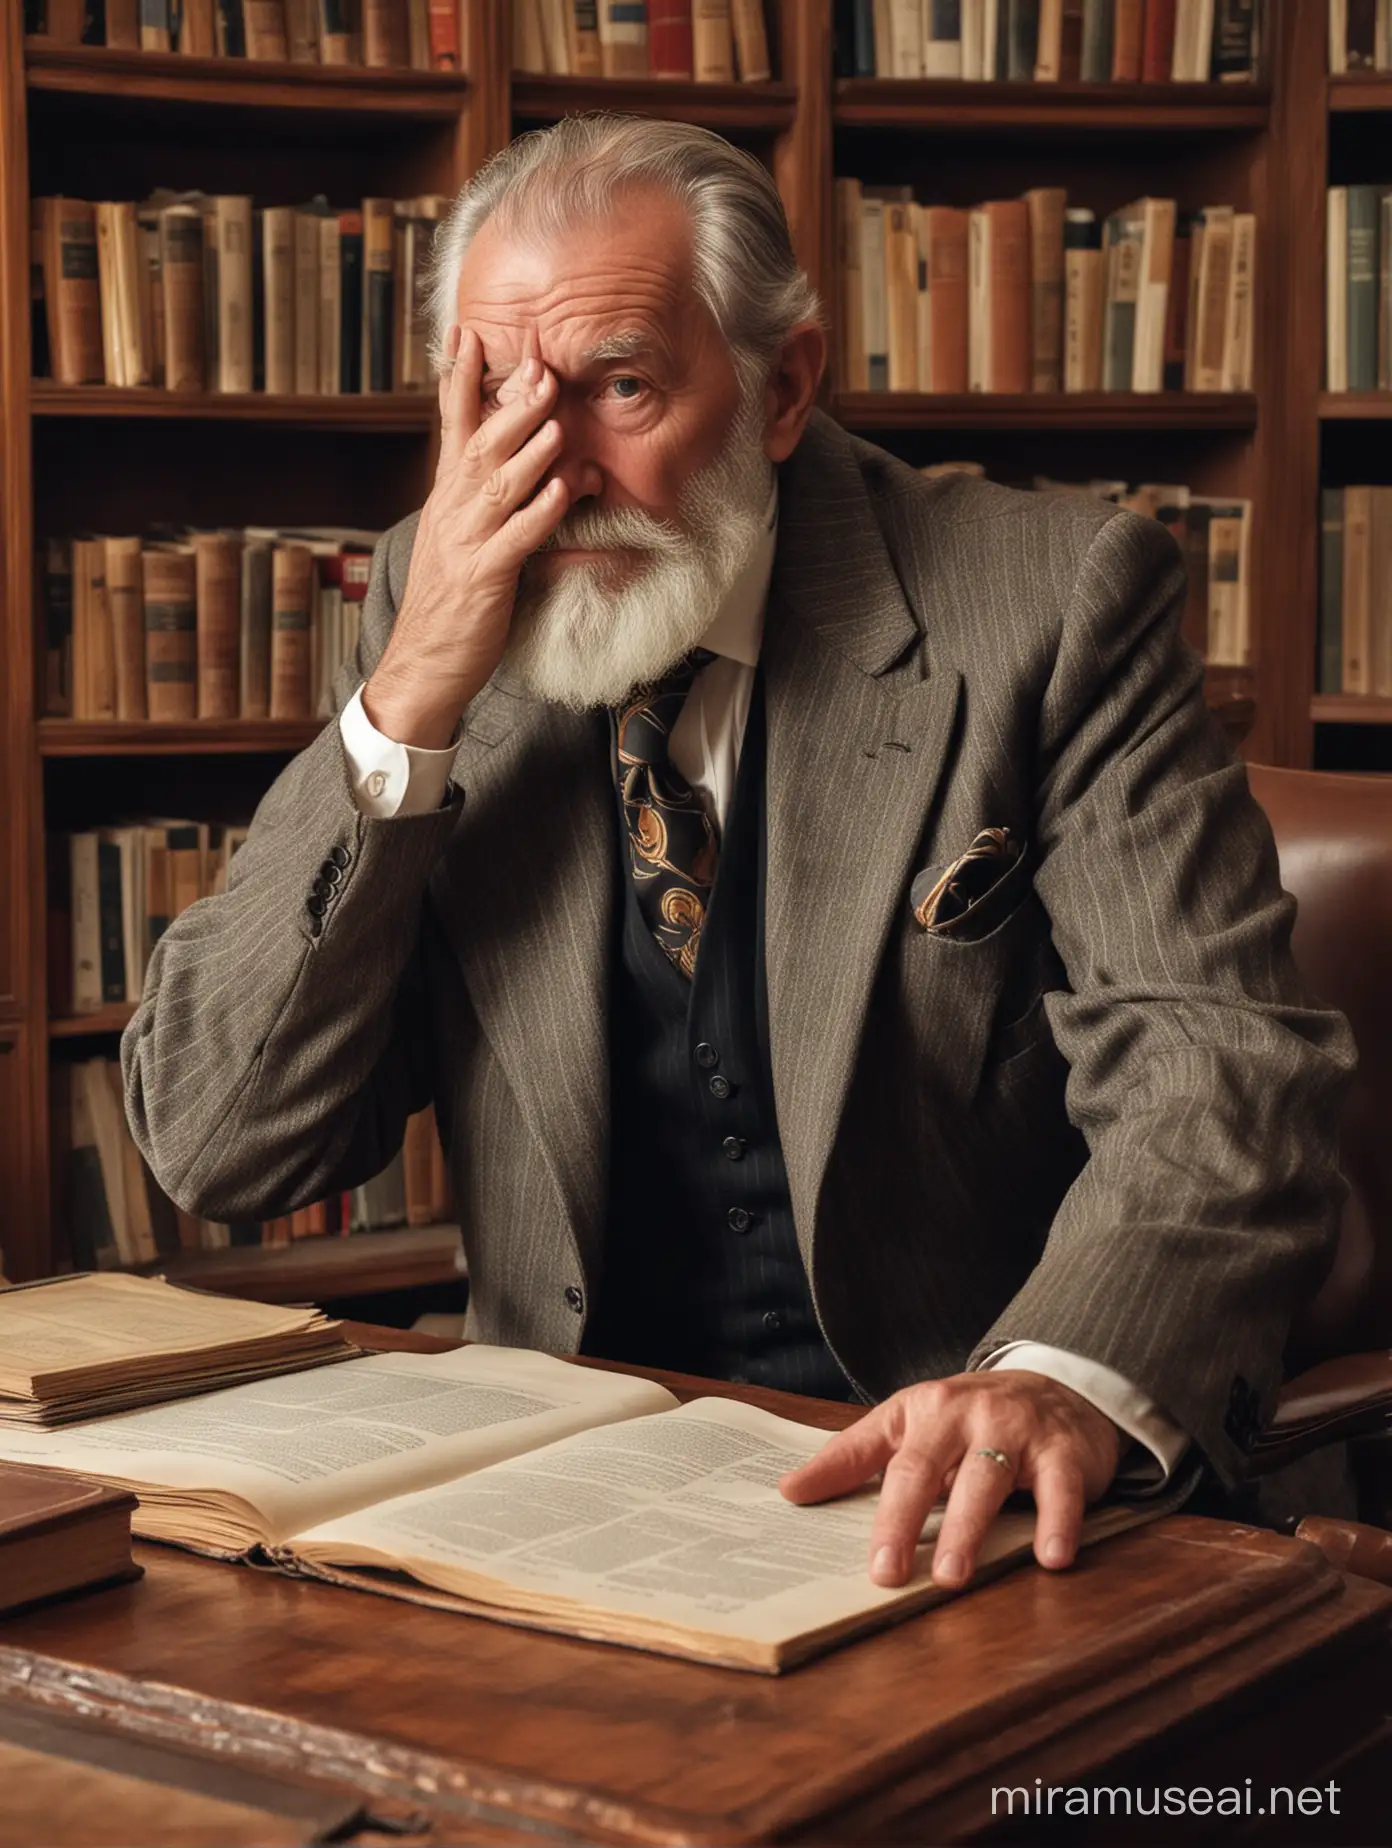 Elderly Man in Vintage Suit with Bushy Beard Concealing Face in Antique Mansion Interior